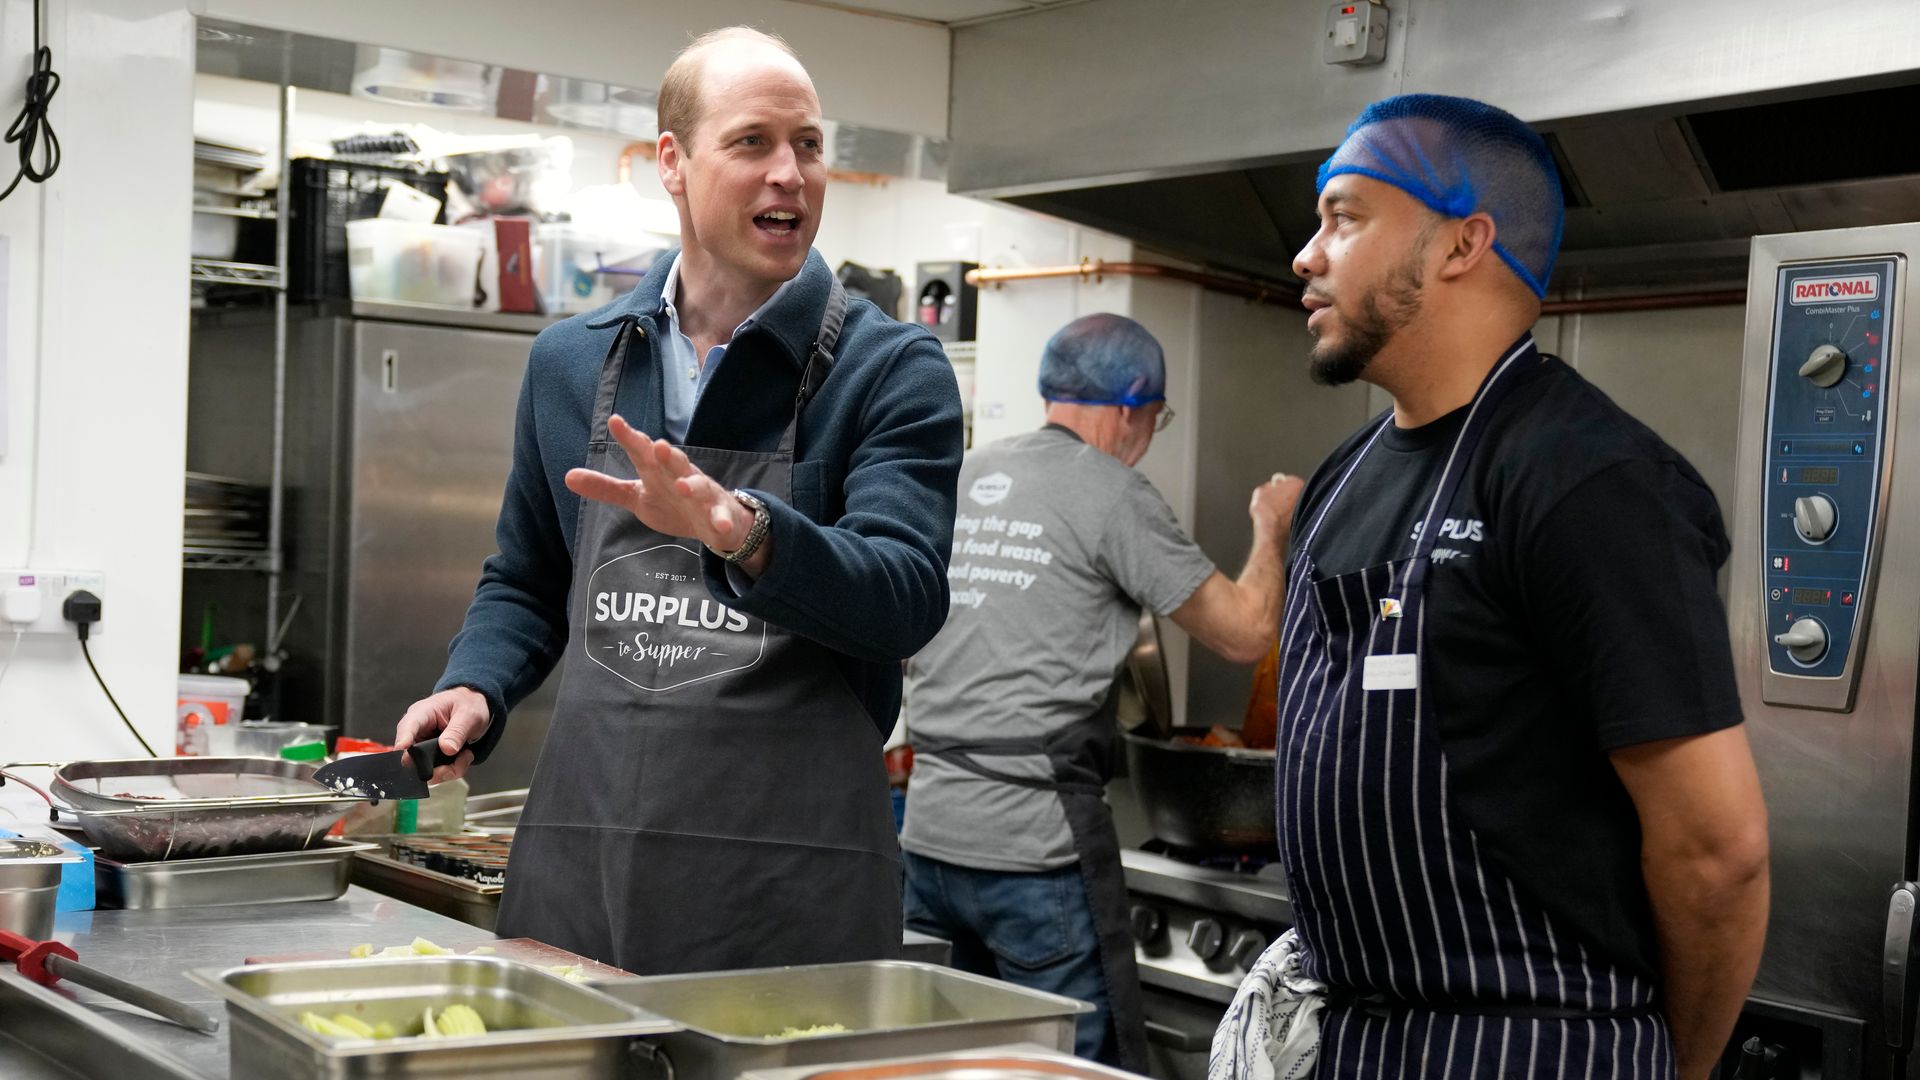 Prince William helps make bolognese sauce with head chef Mario Confait